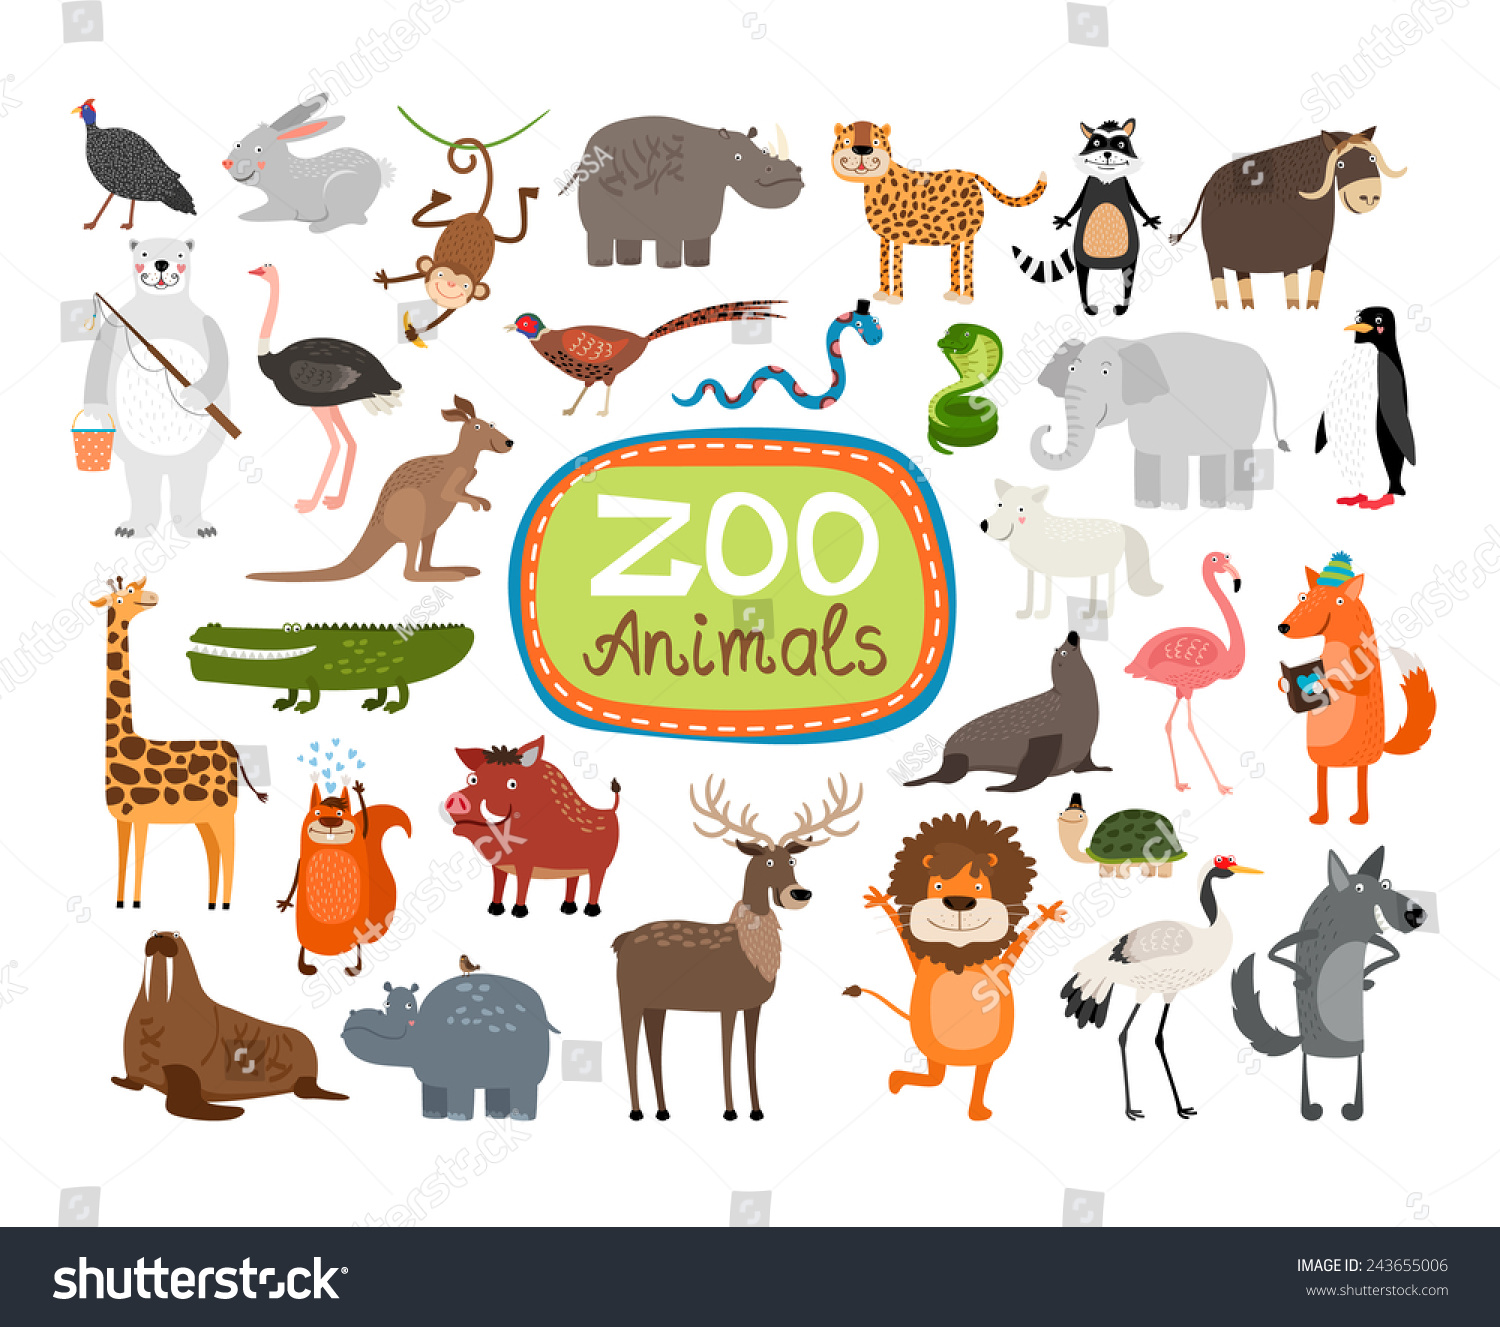 clipart of different animals - photo #39